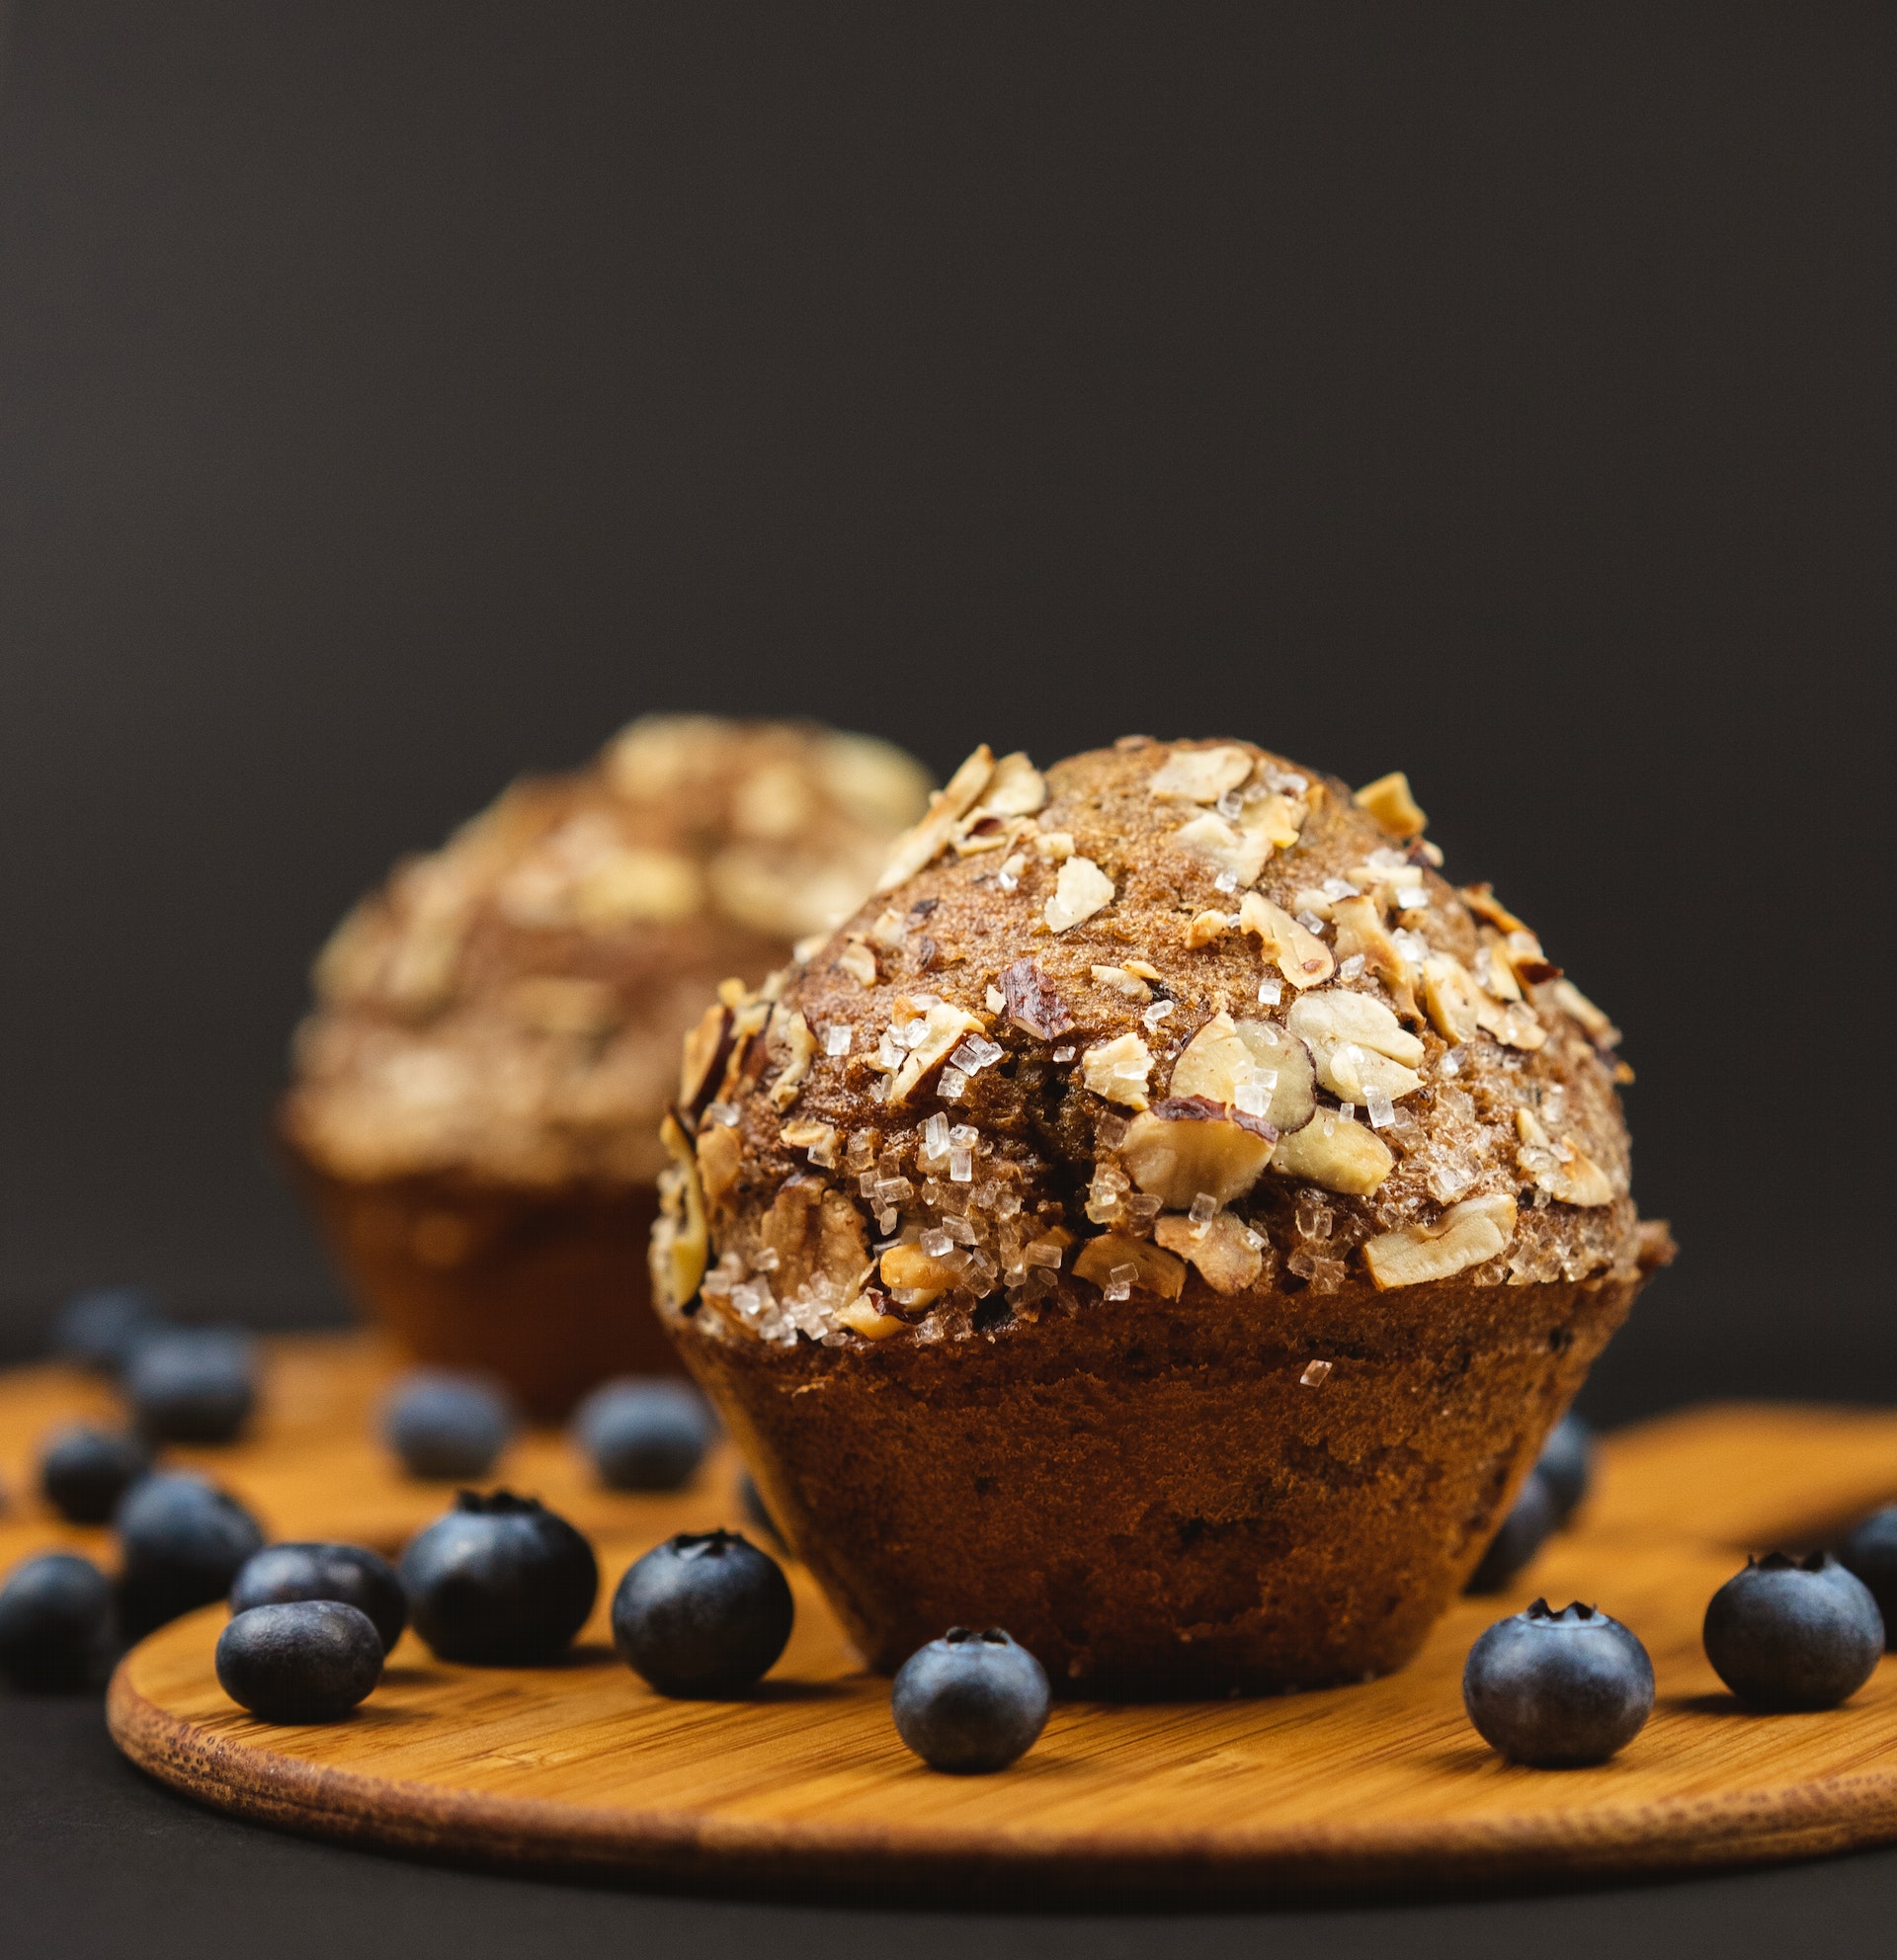 Muffins with blueberry, nuts and other ingredients